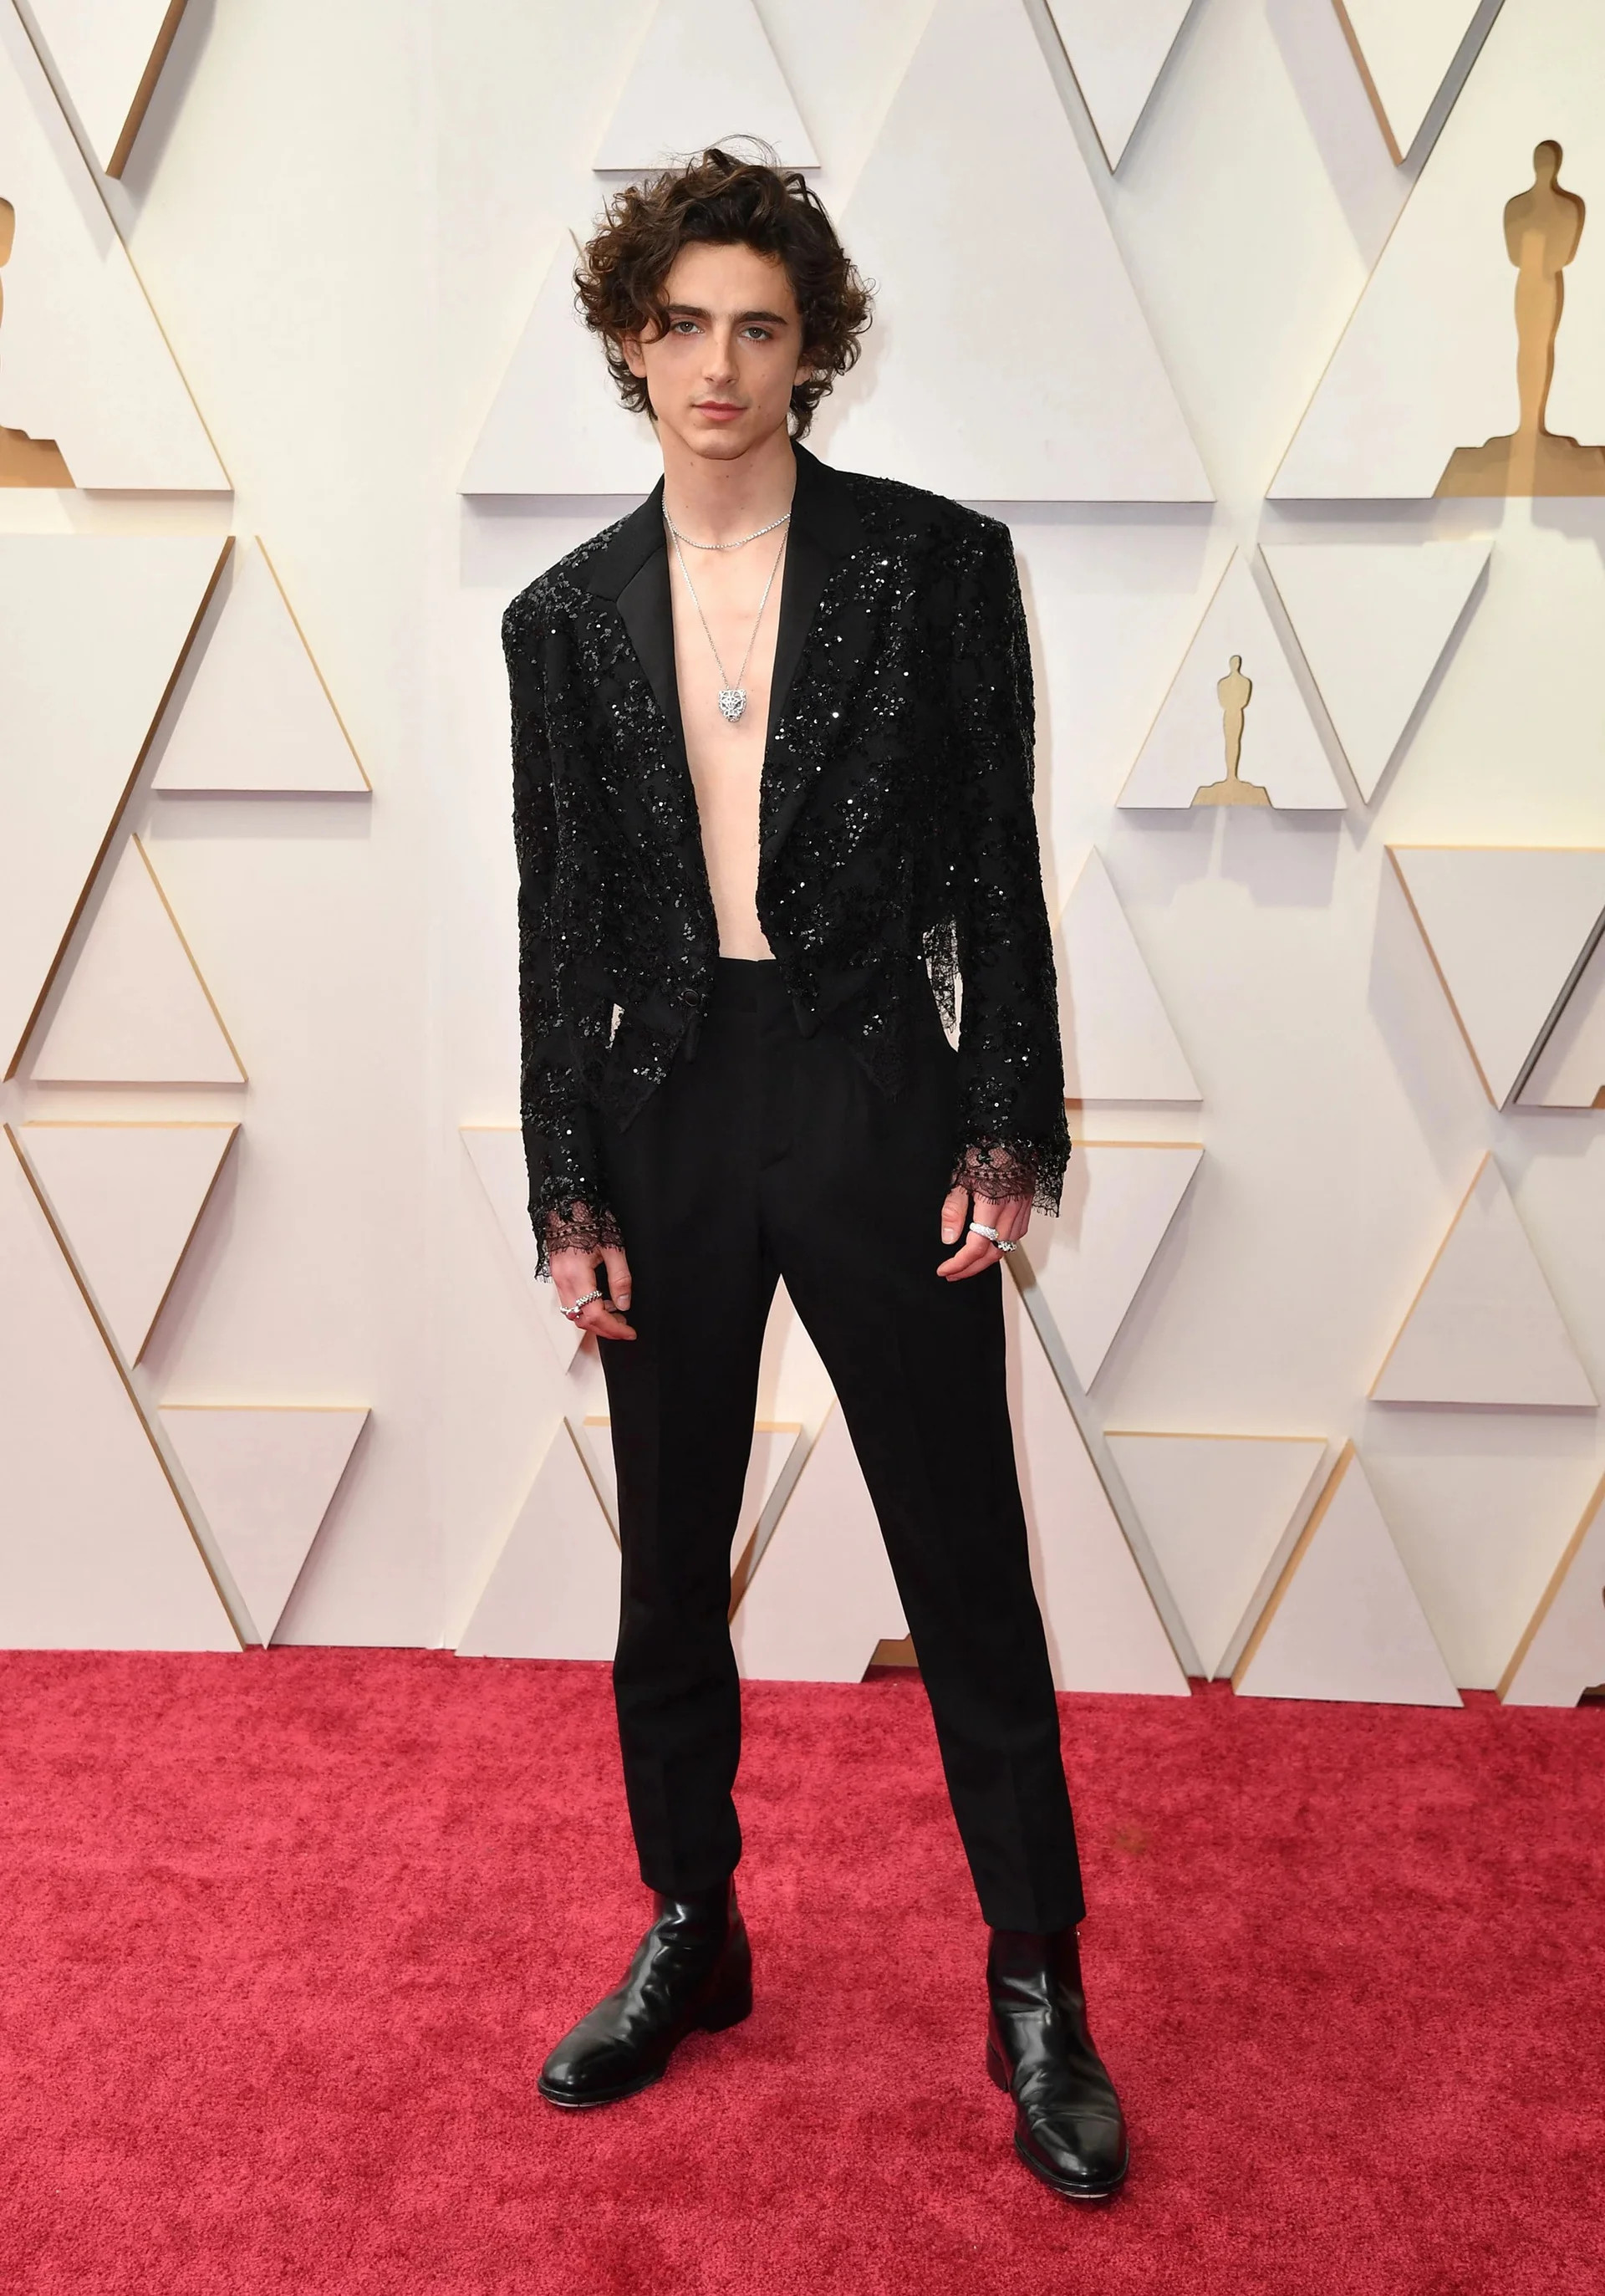 Ngôi sao 'Call Me by Your Name' Timothee Chalamet